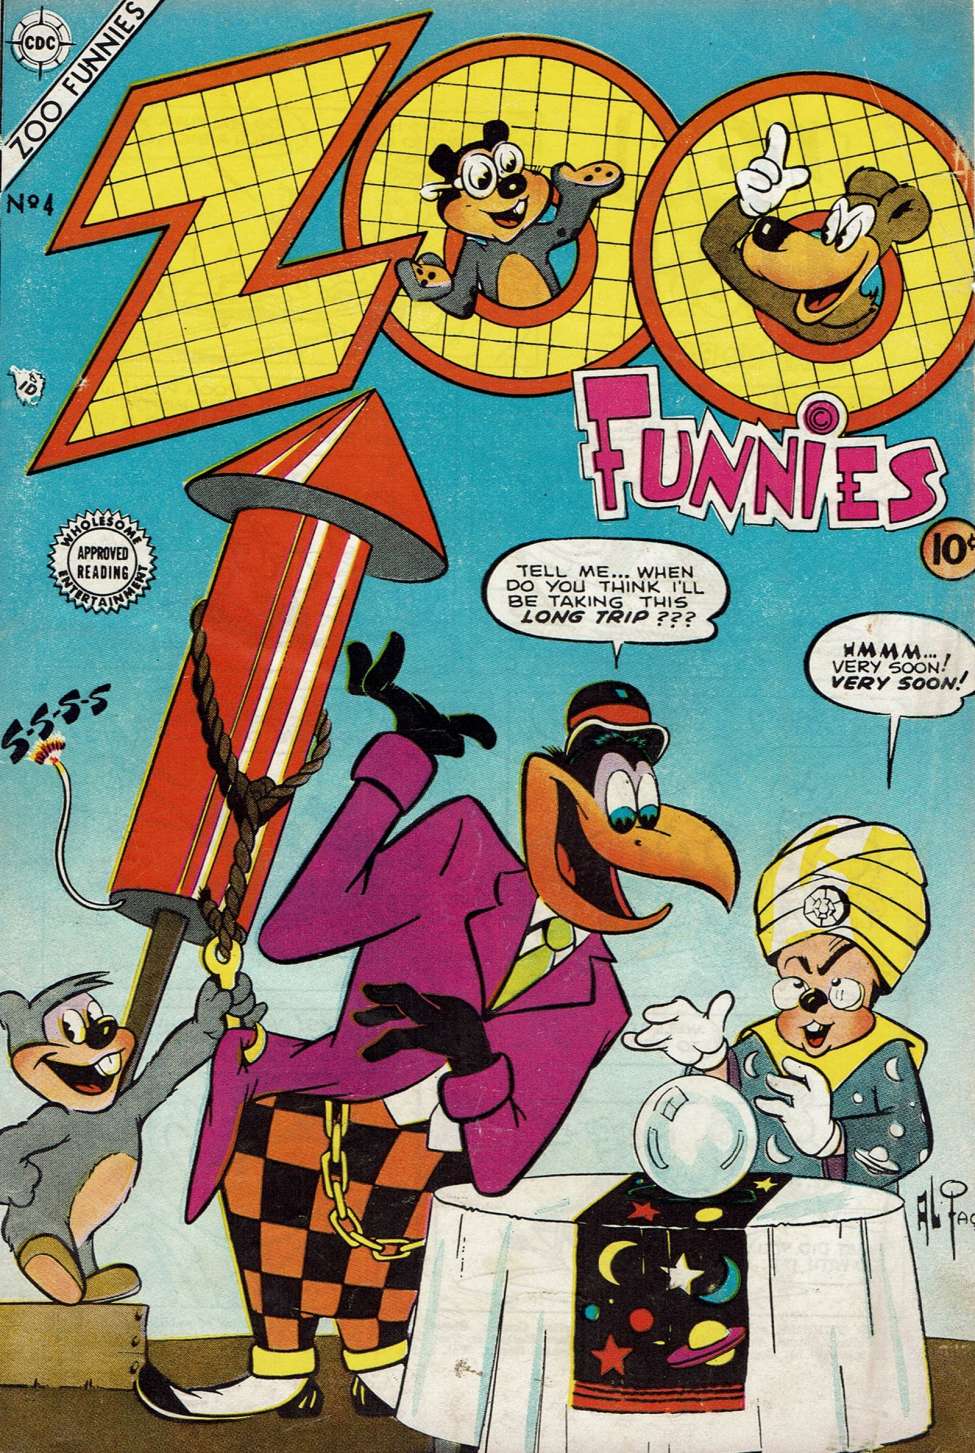 Comic Book Cover For Zoo Funnies v2 4 - Version 2